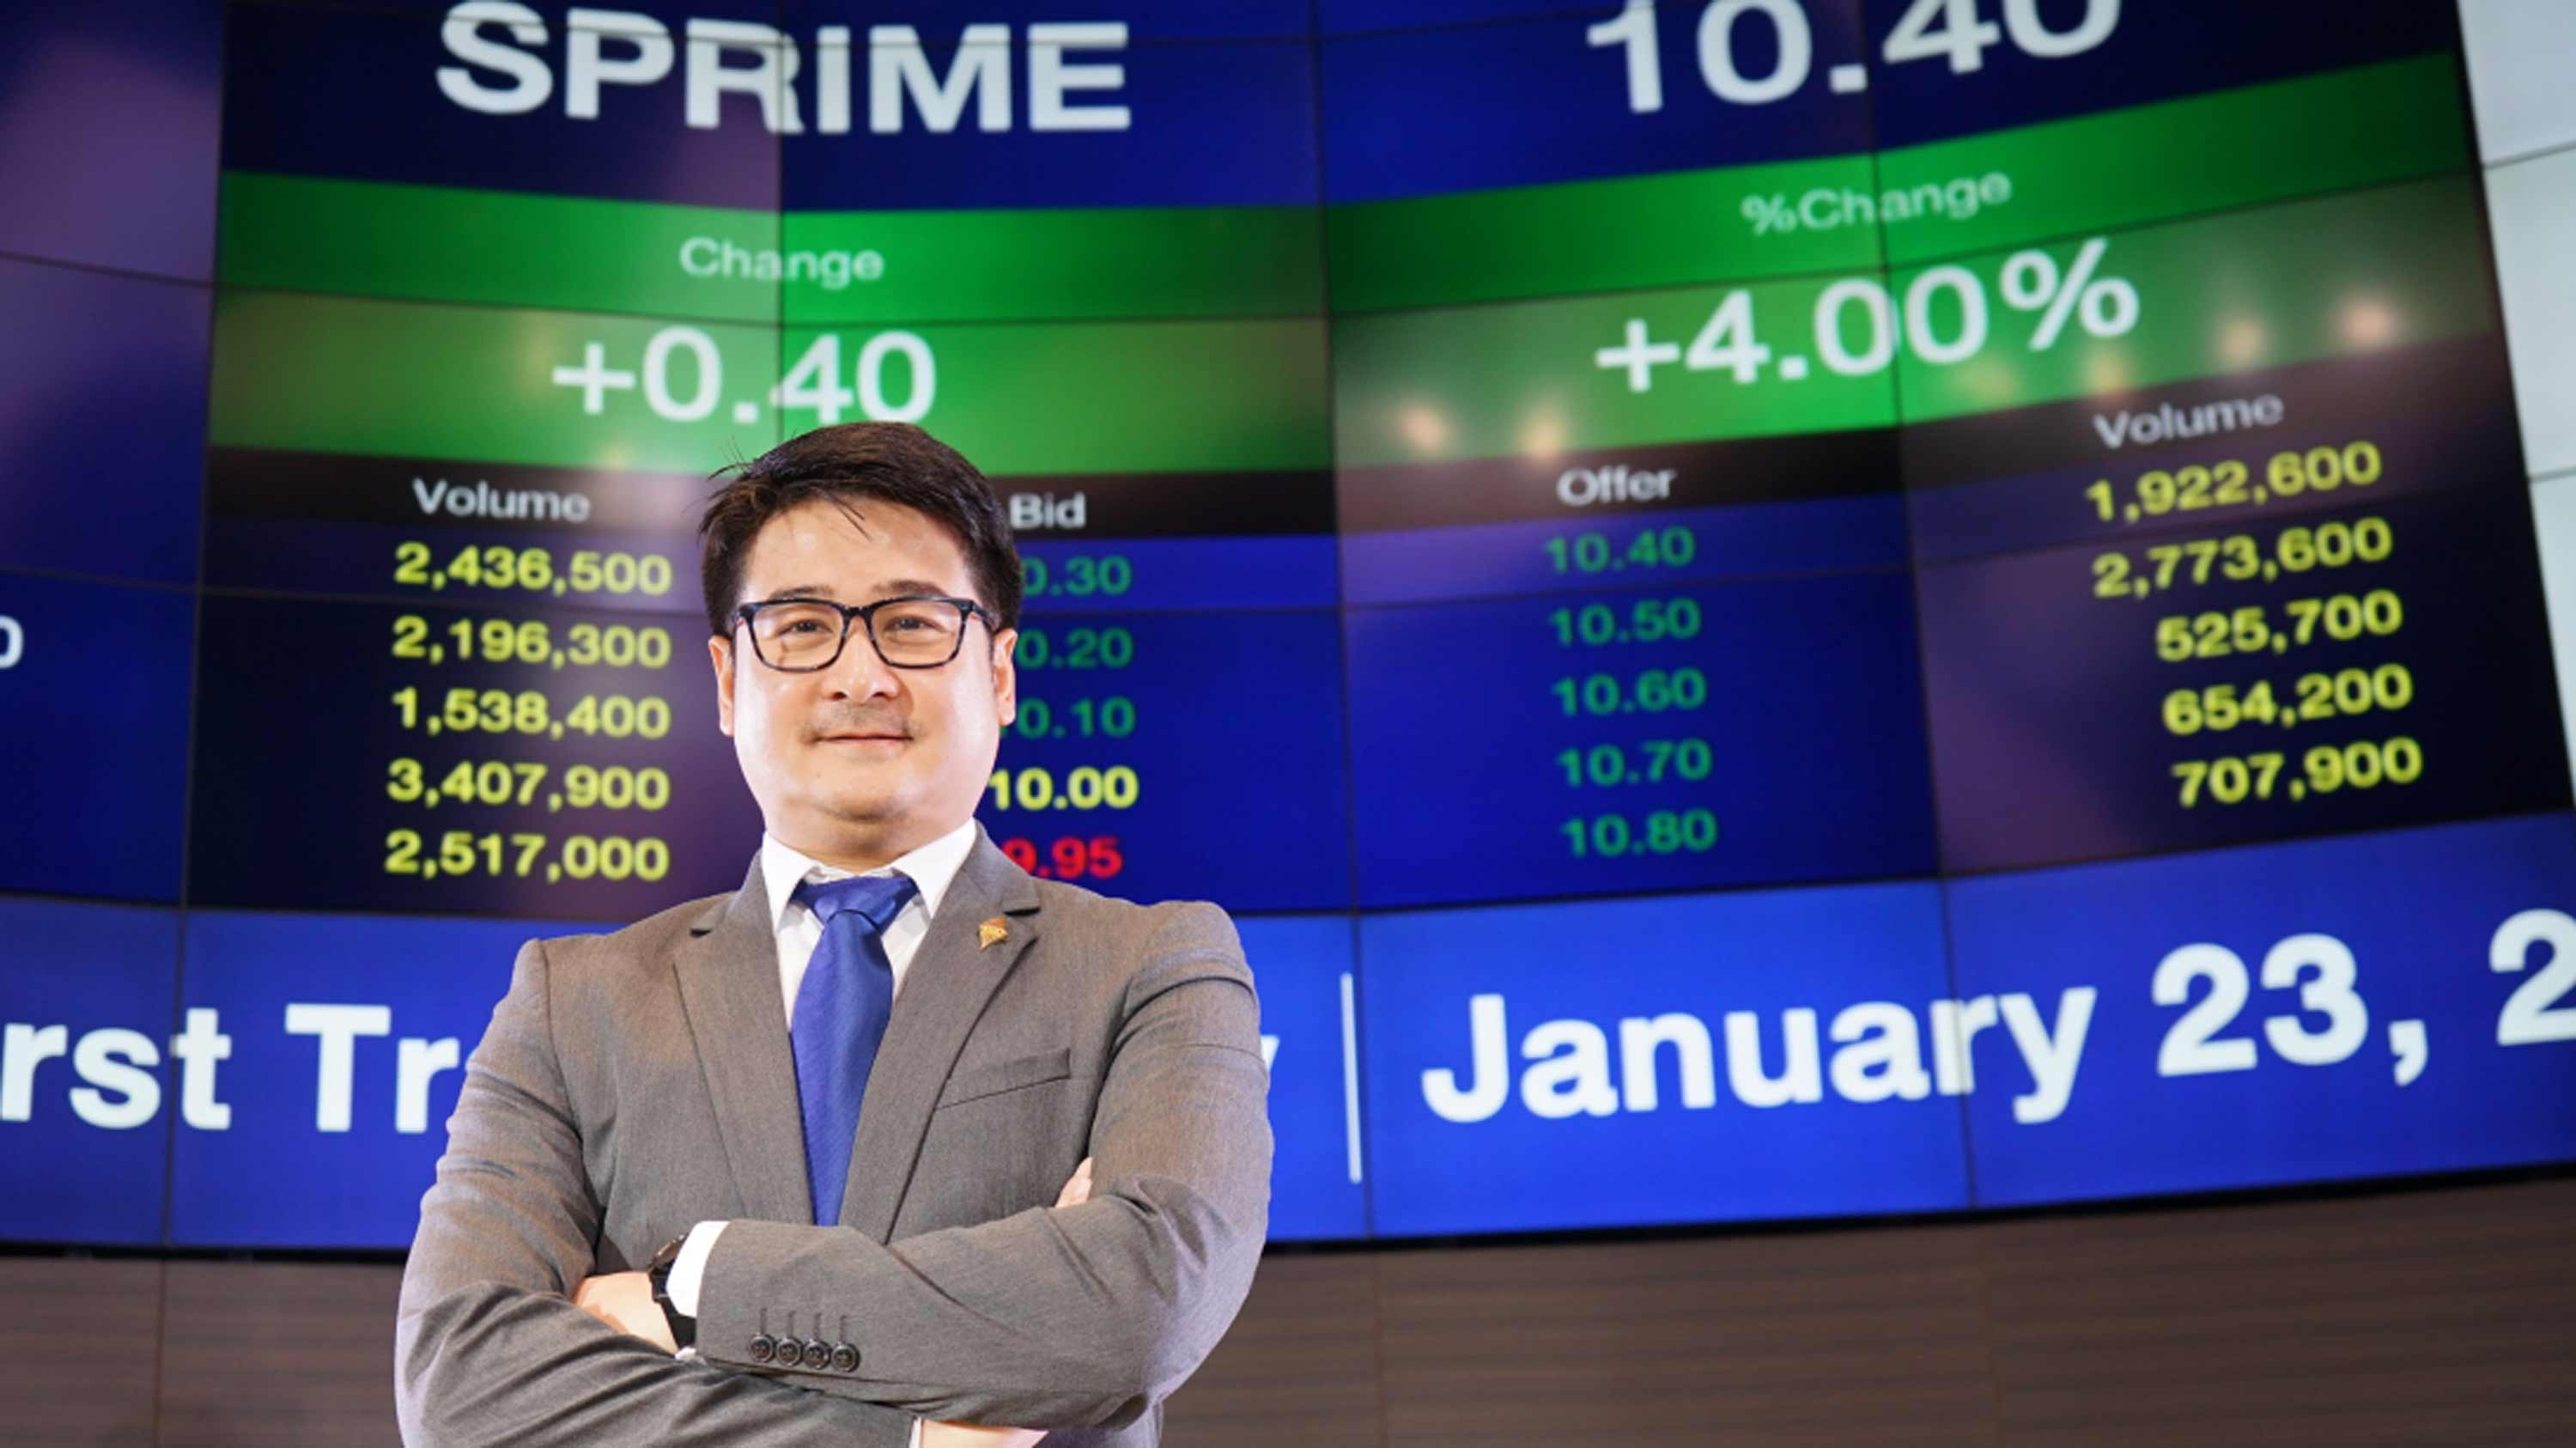 Singha Estate strikes a deal of three asset leases with SPRIME<br>to strengthen its financial health while enhancing SPRIME’s growth potential